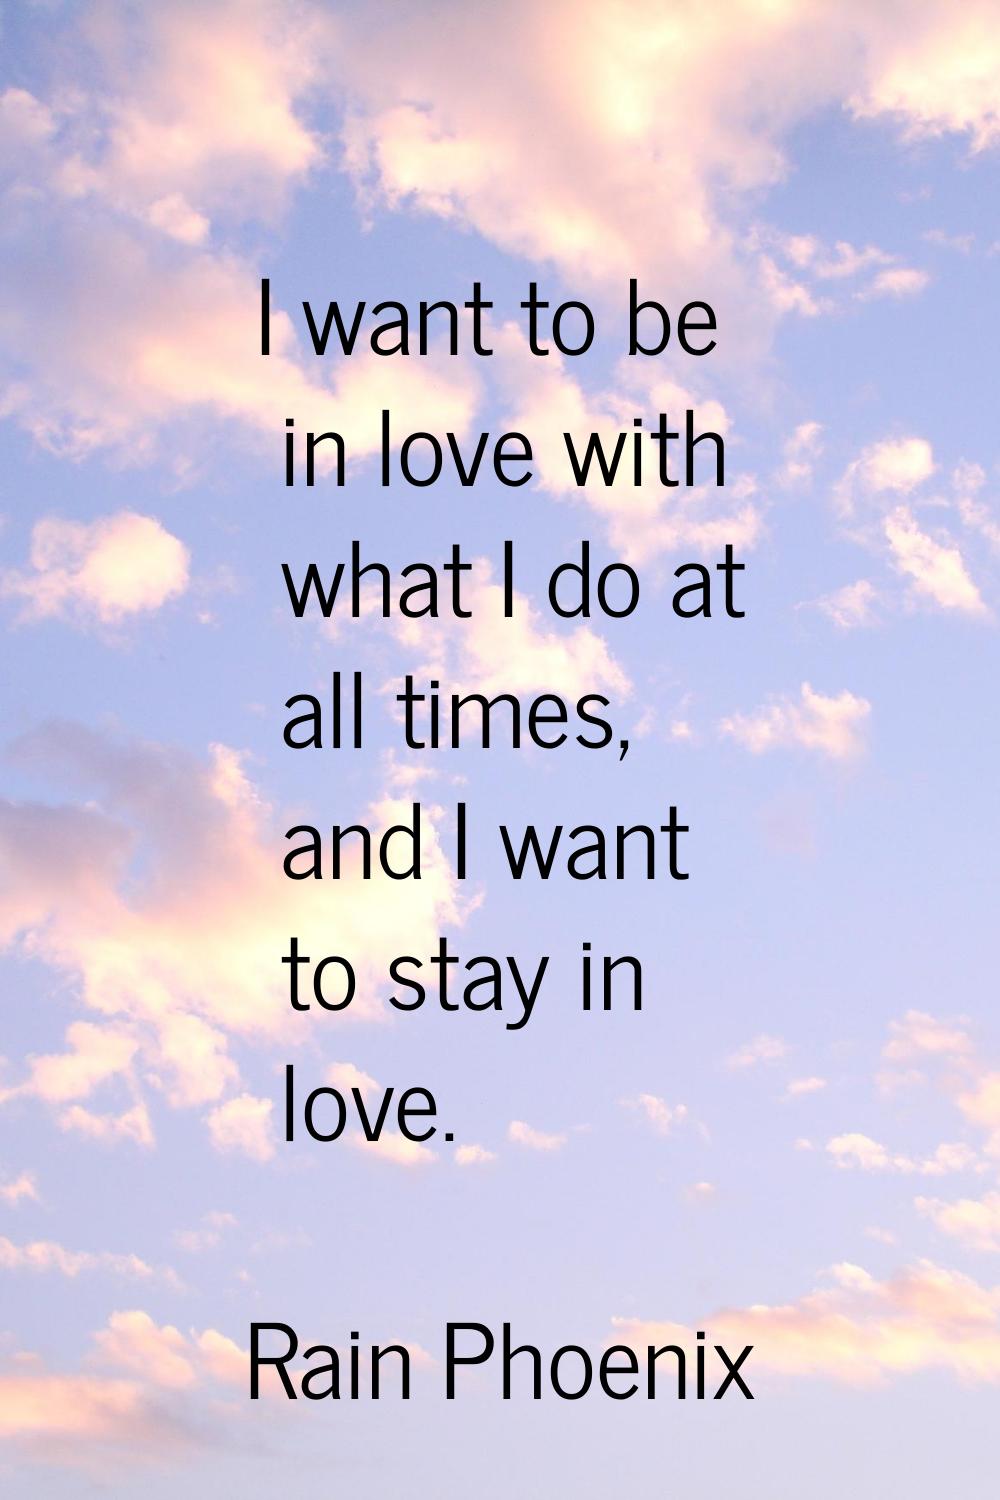 I want to be in love with what I do at all times, and I want to stay in love.